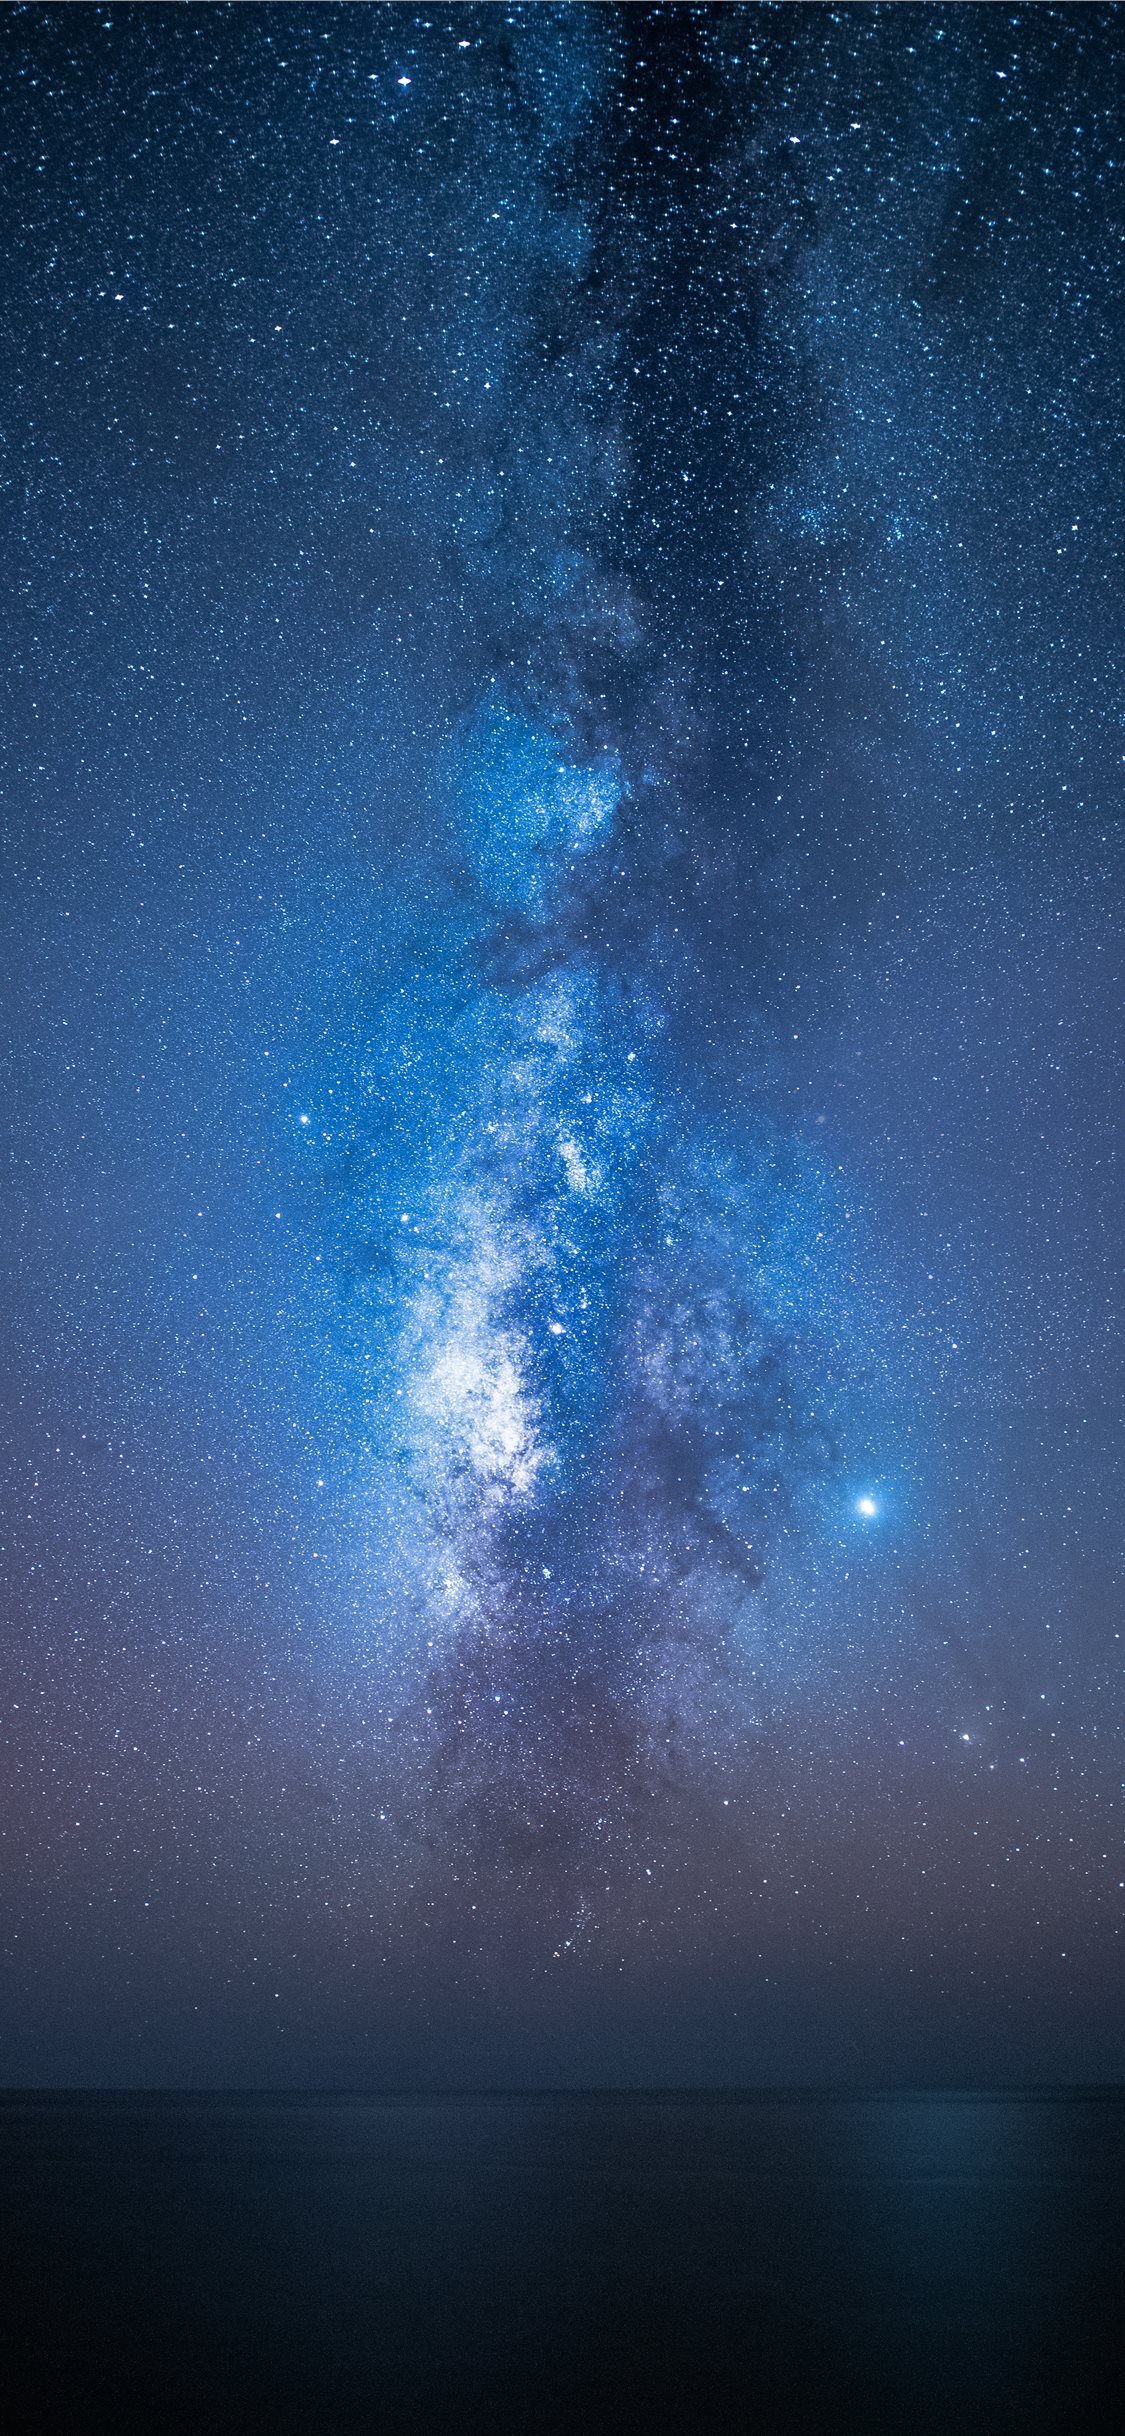 Free Download Free Download The View Of Milkyway Wallpaper Beaty Your Iphone X For